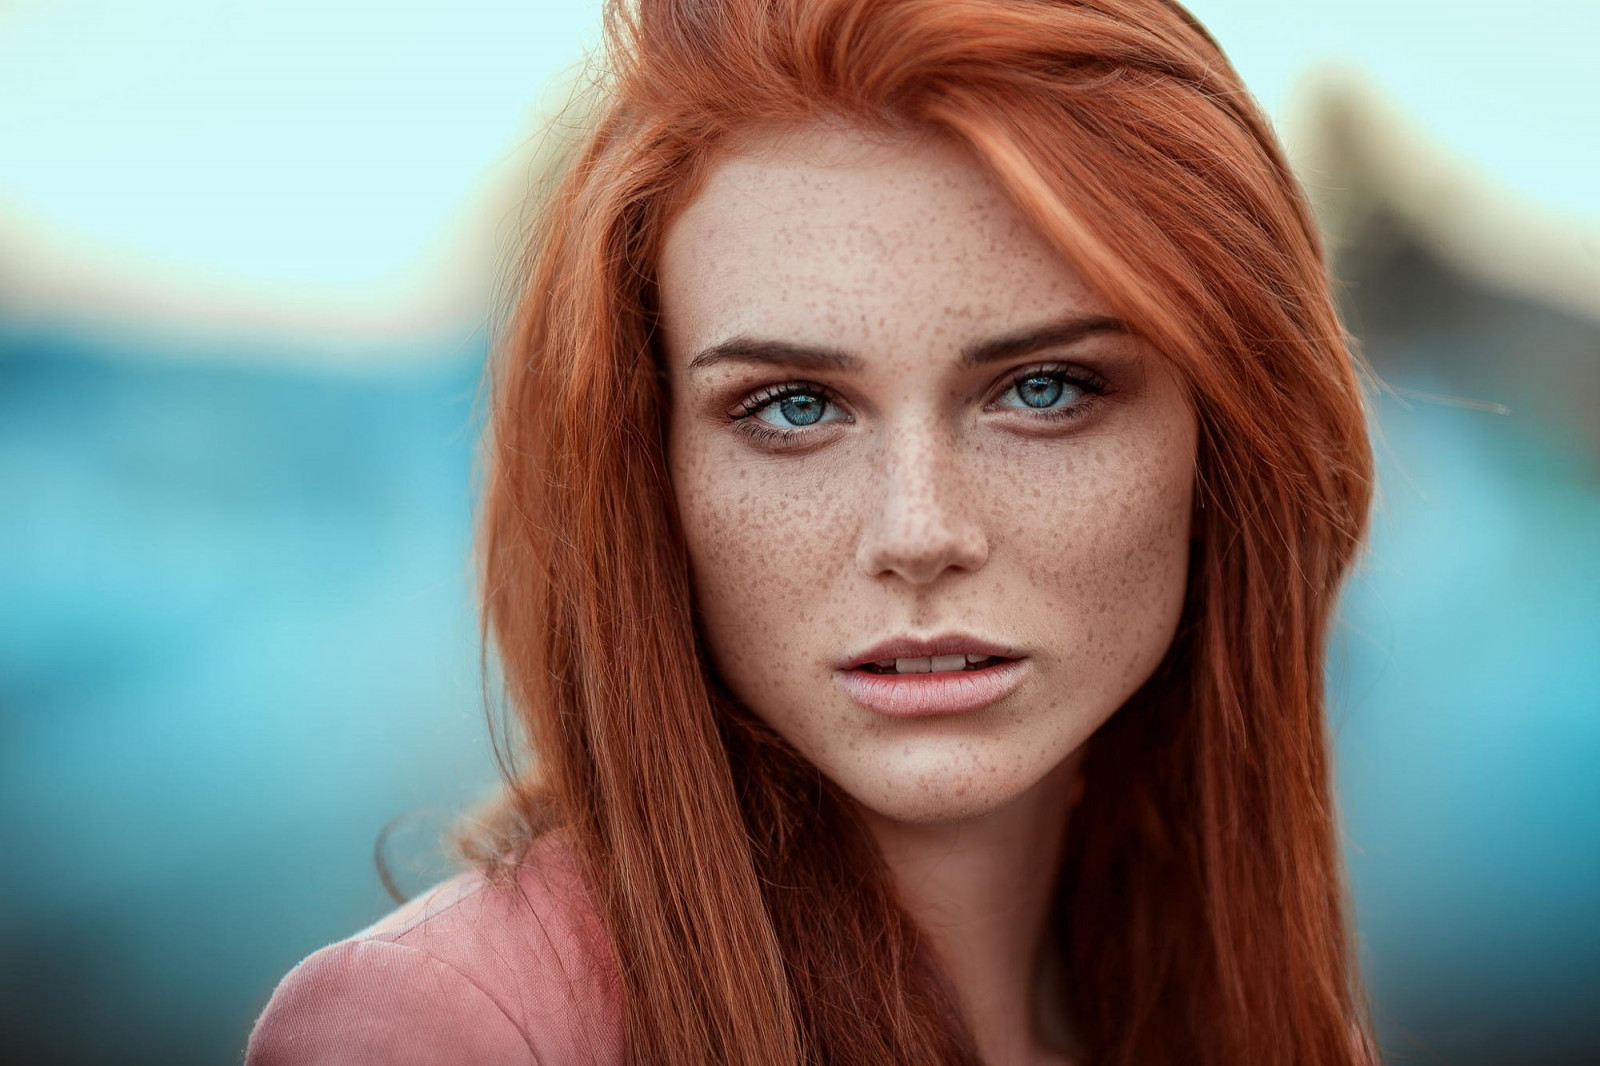 women_redhead_freckles_face_portrait_blue_eyes_looking_at_viewer_open_mouth-32290.jpg